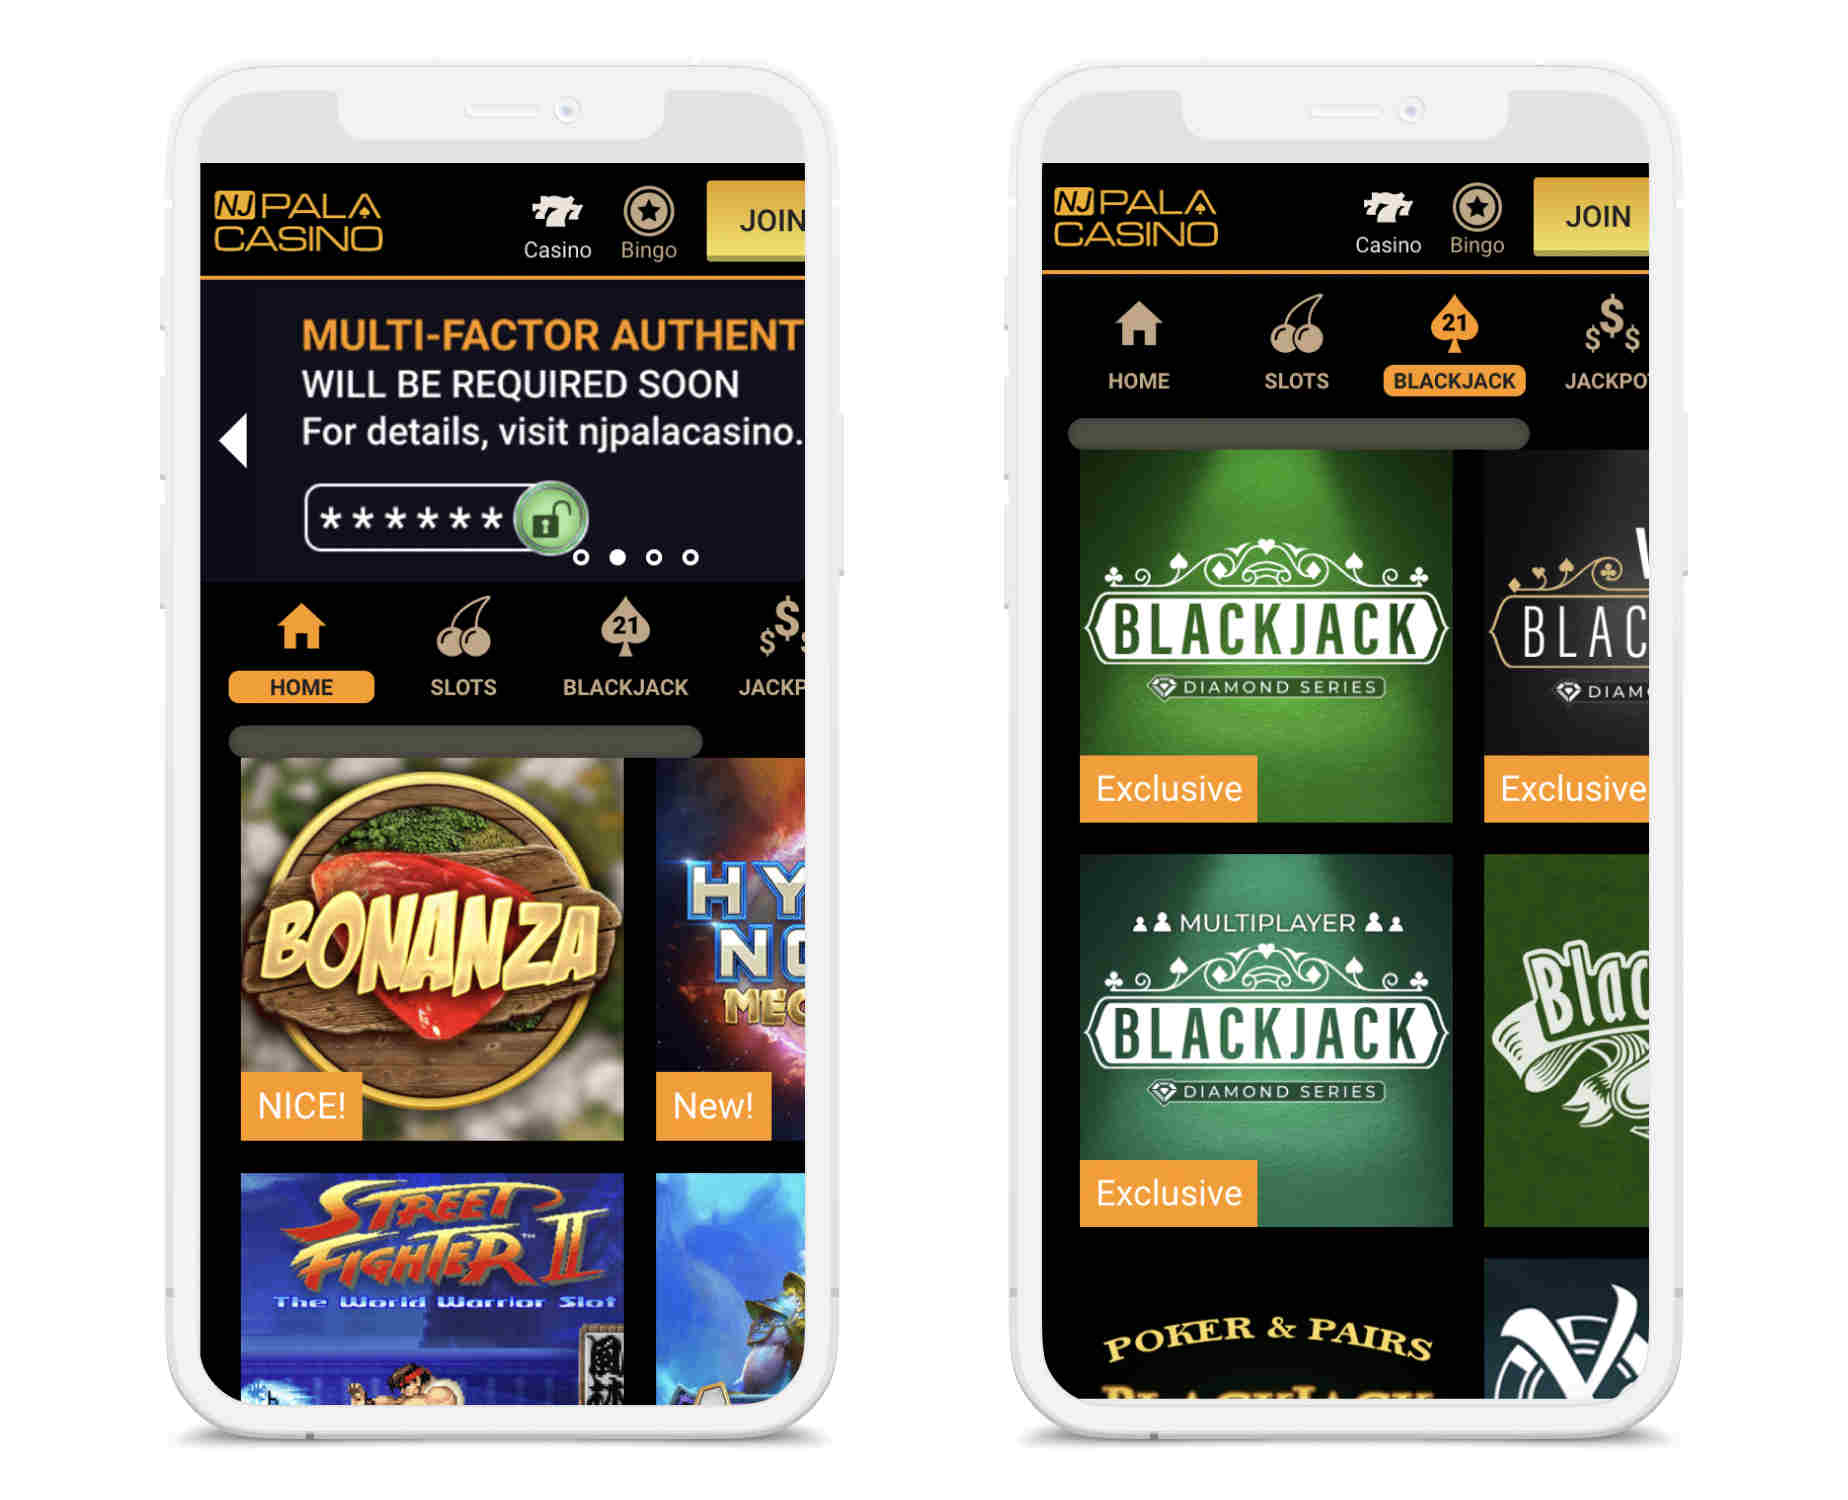 Now You Can Have The casino Of Your Dreams – Cheaper/Faster Than You Ever Imagined